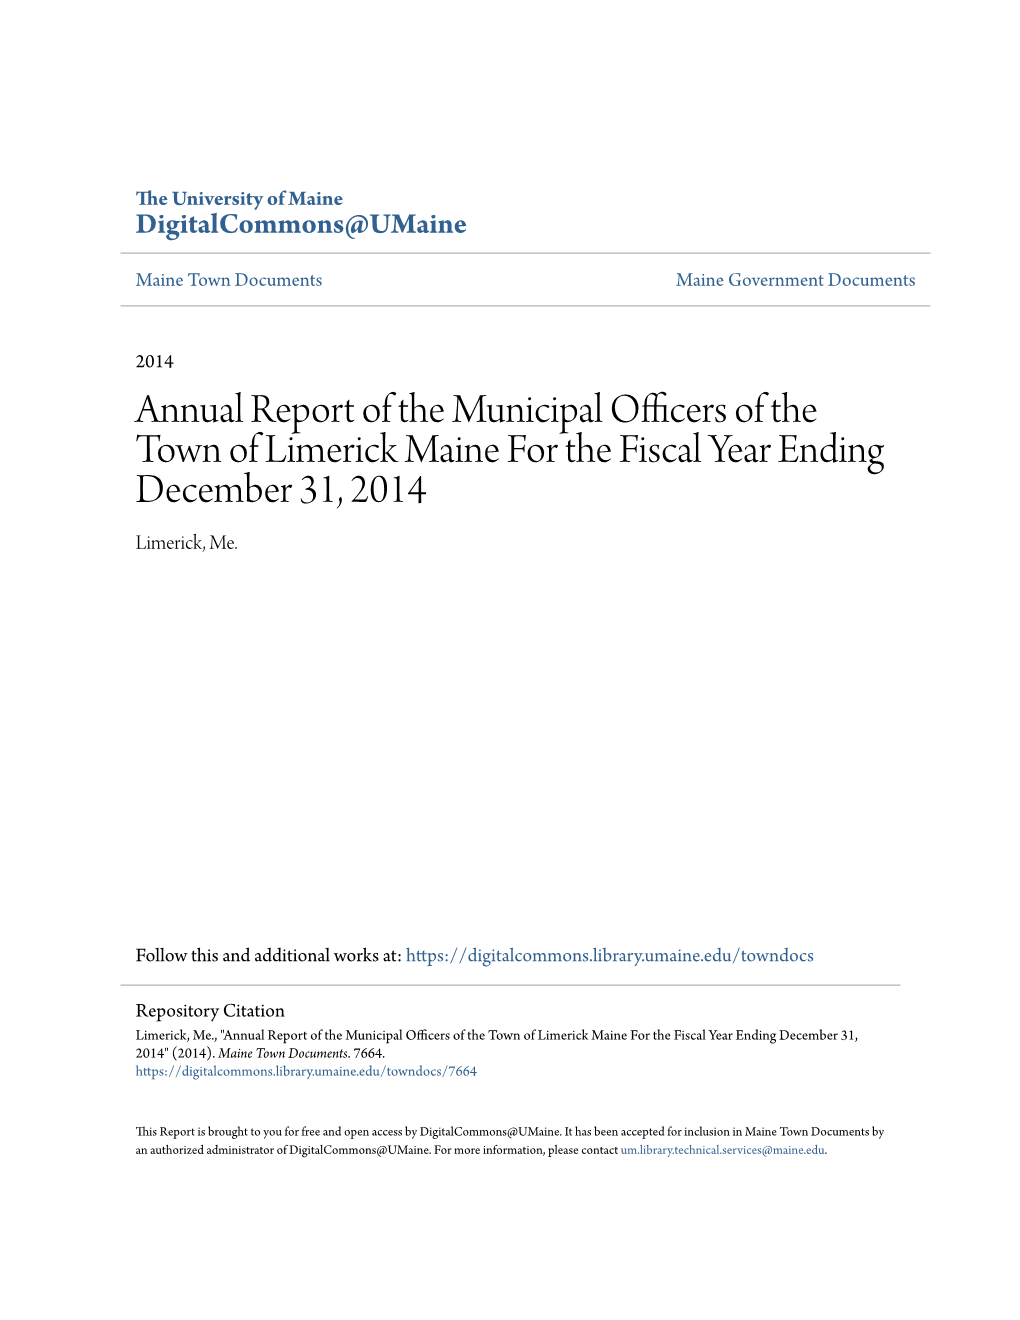 Annual Report of the Municipal Officers of the Town of Limerick Maine for the Fiscal Year Ending December 31, 2014 Limerick, Me